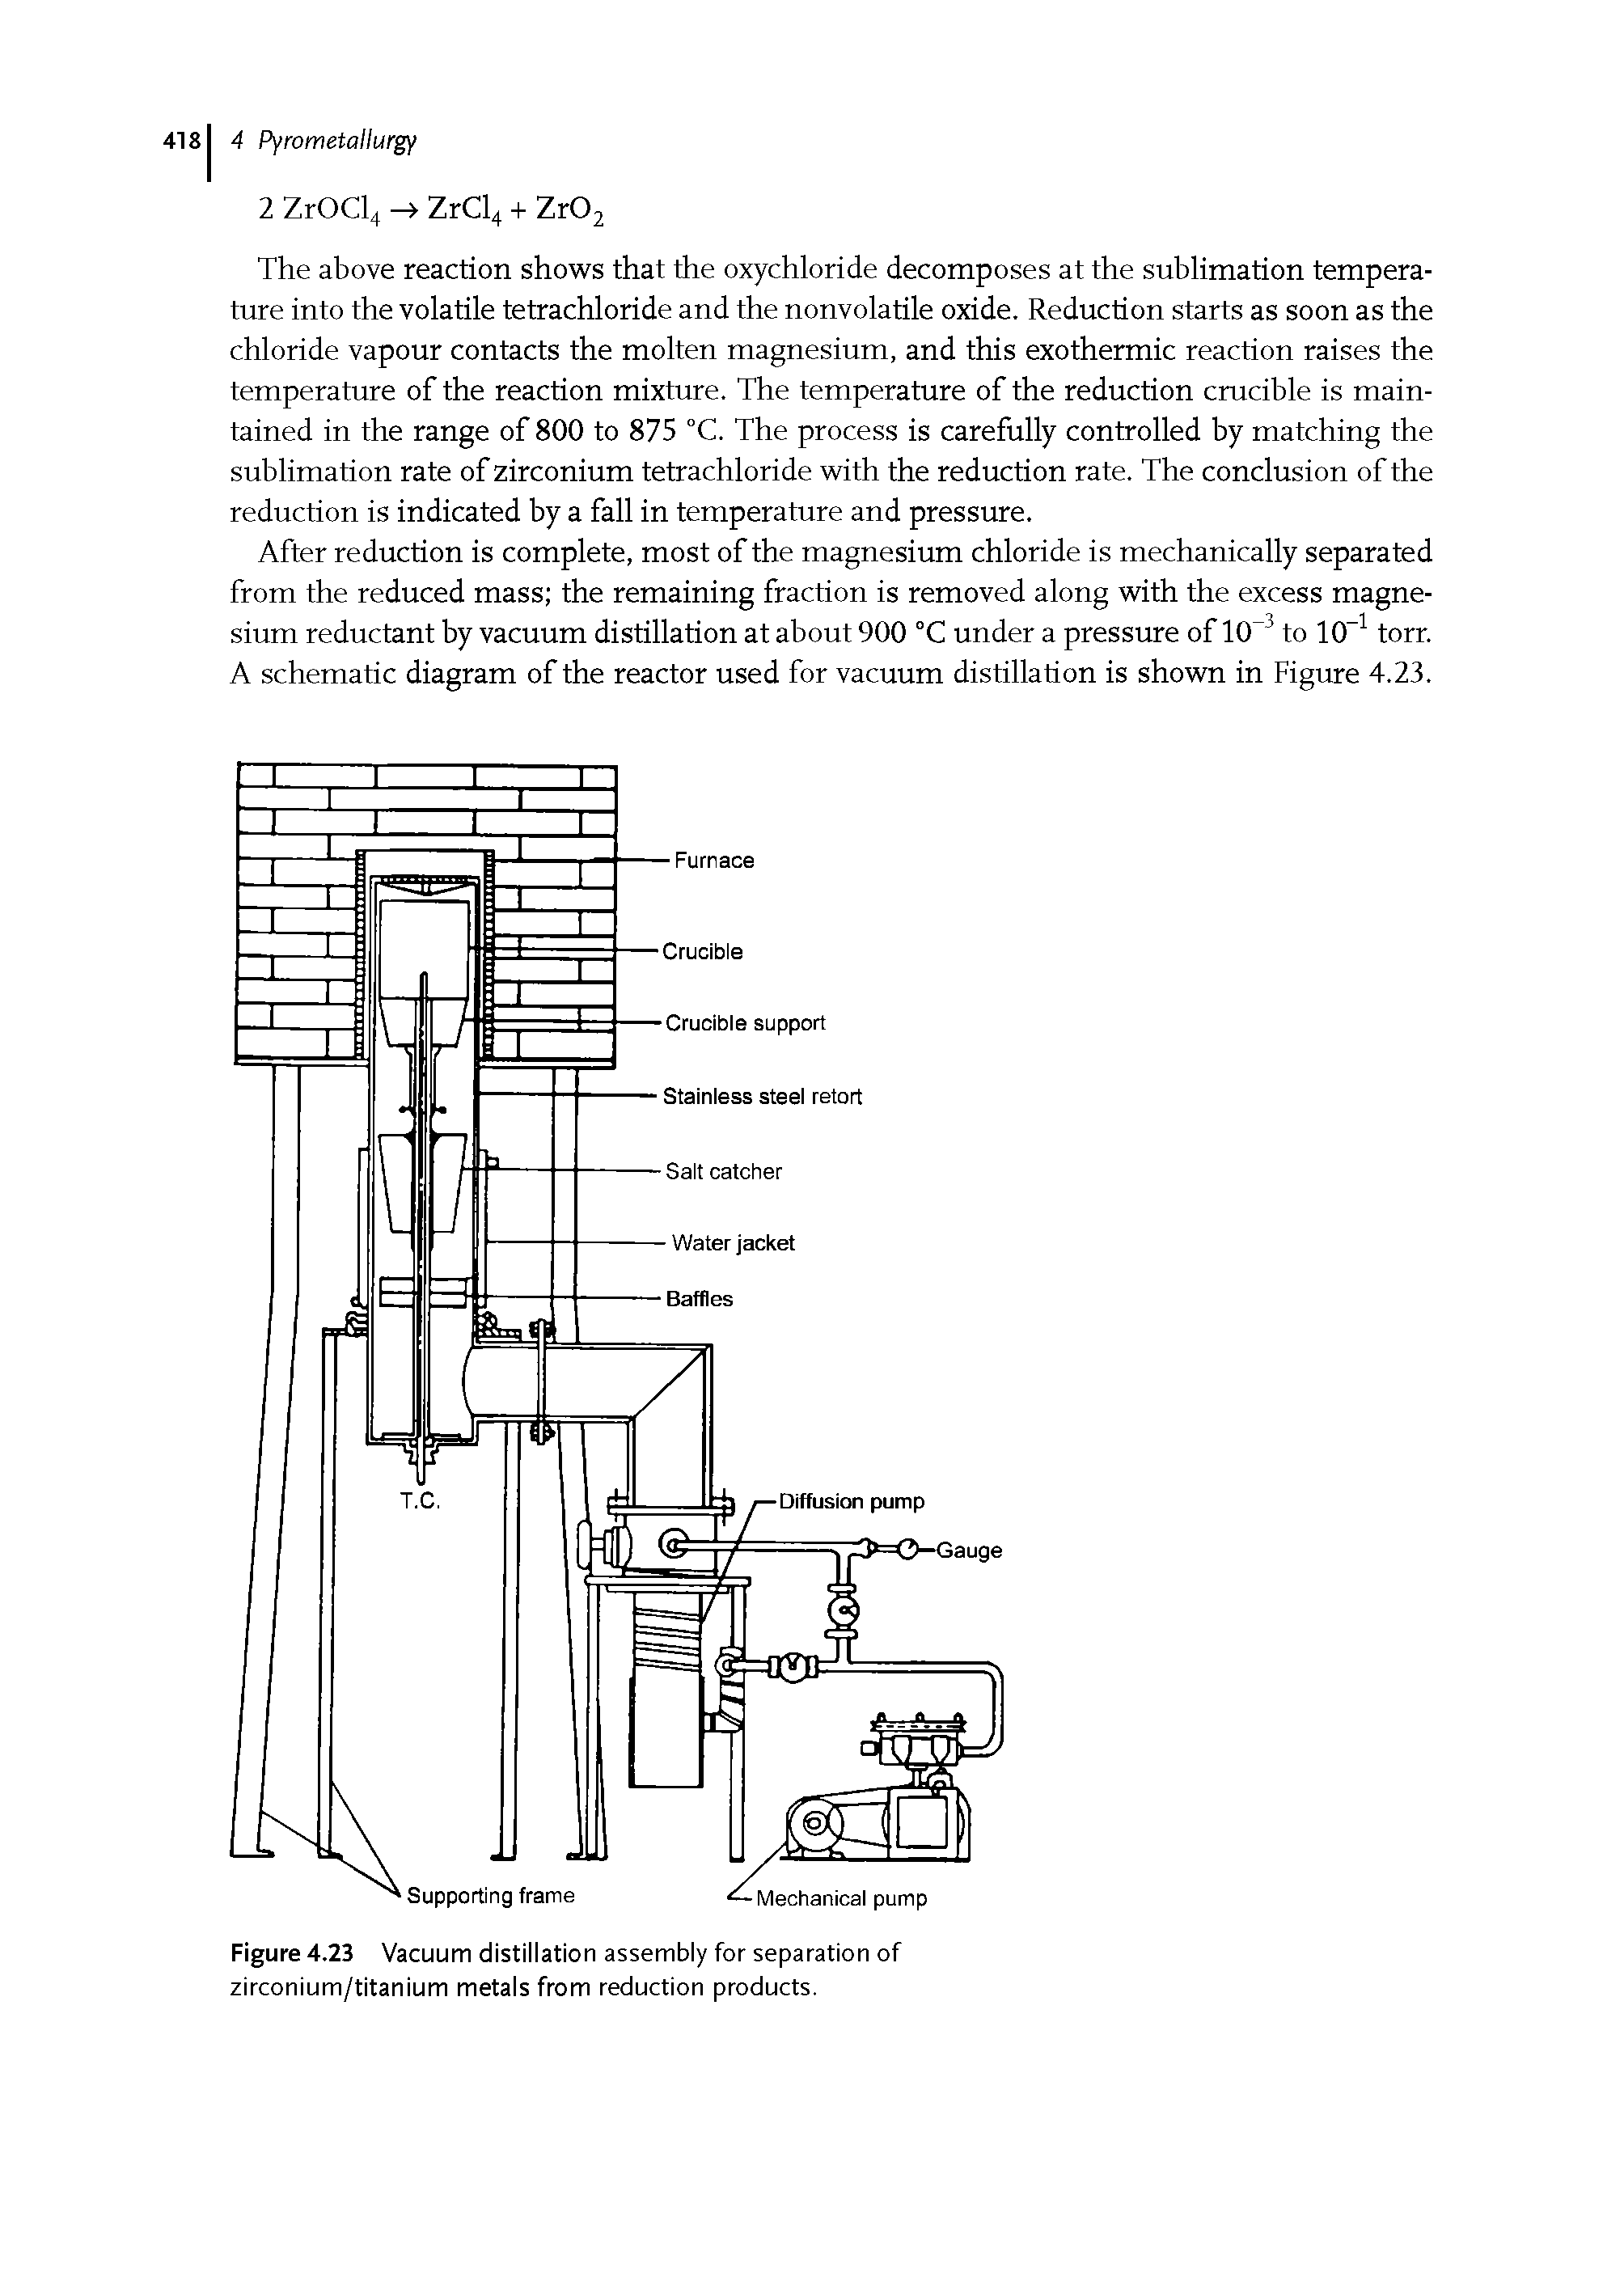 Figure 4.23 Vacuum distillation assembly for separation of zirconium/titanium metals from reduction products.